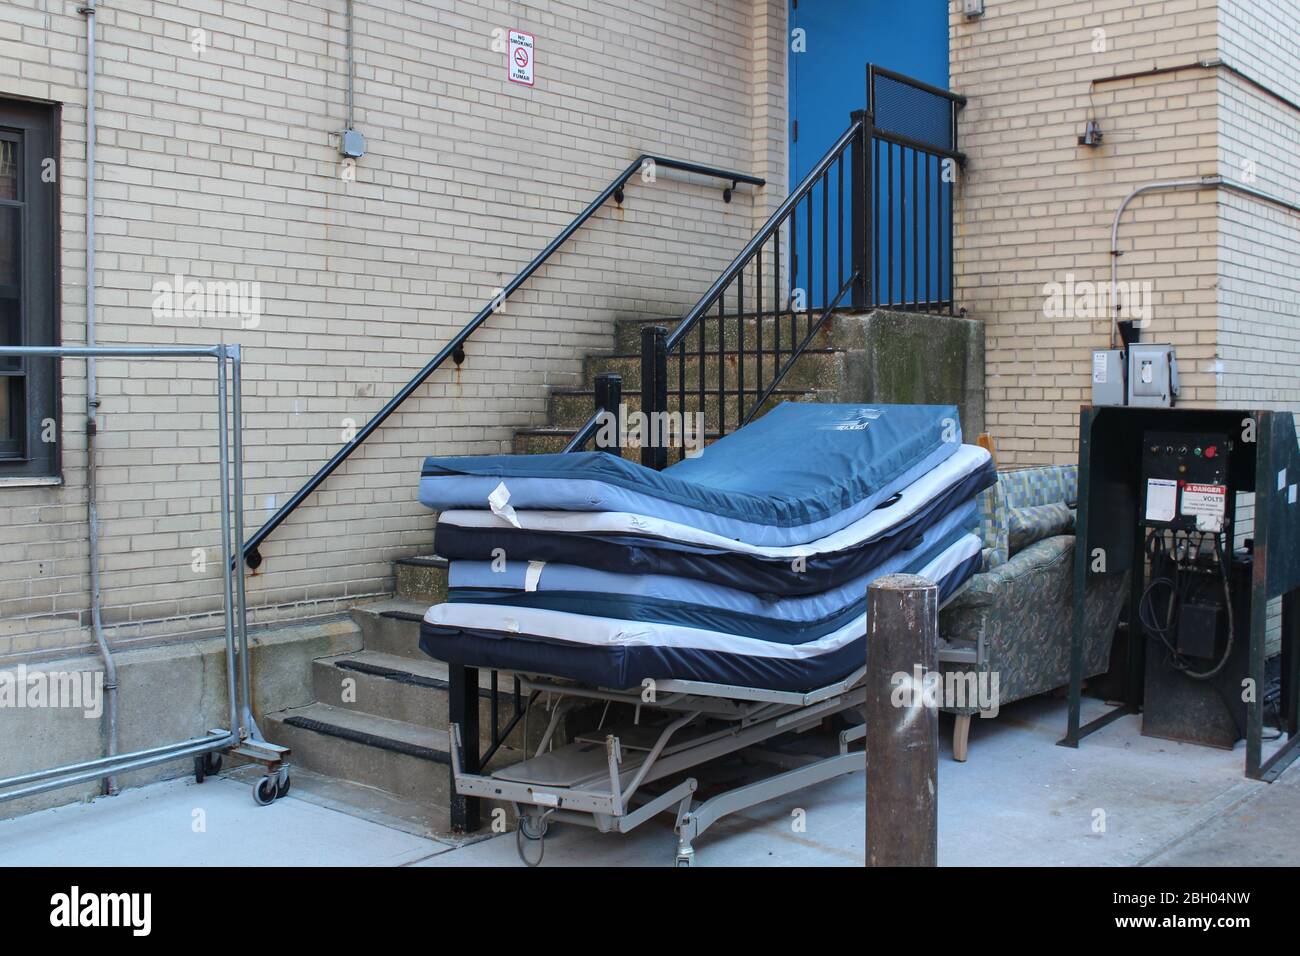 New York, New York, USA. 22nd Apr, 2020. These medical mattresses have been stacked at the bottom of a staircase in the backyard of the Plaza Rehabilitation and Nursing Center in Bronx, New York City. 3425 residents of New York state nursing homes including 554 in Bronx have died so far because of COVID-19. That represents nearly 25% of the state's pandemic deaths. Credit: Marie Le Ble/ZUMA Wire/Alamy Live News Stock Photo